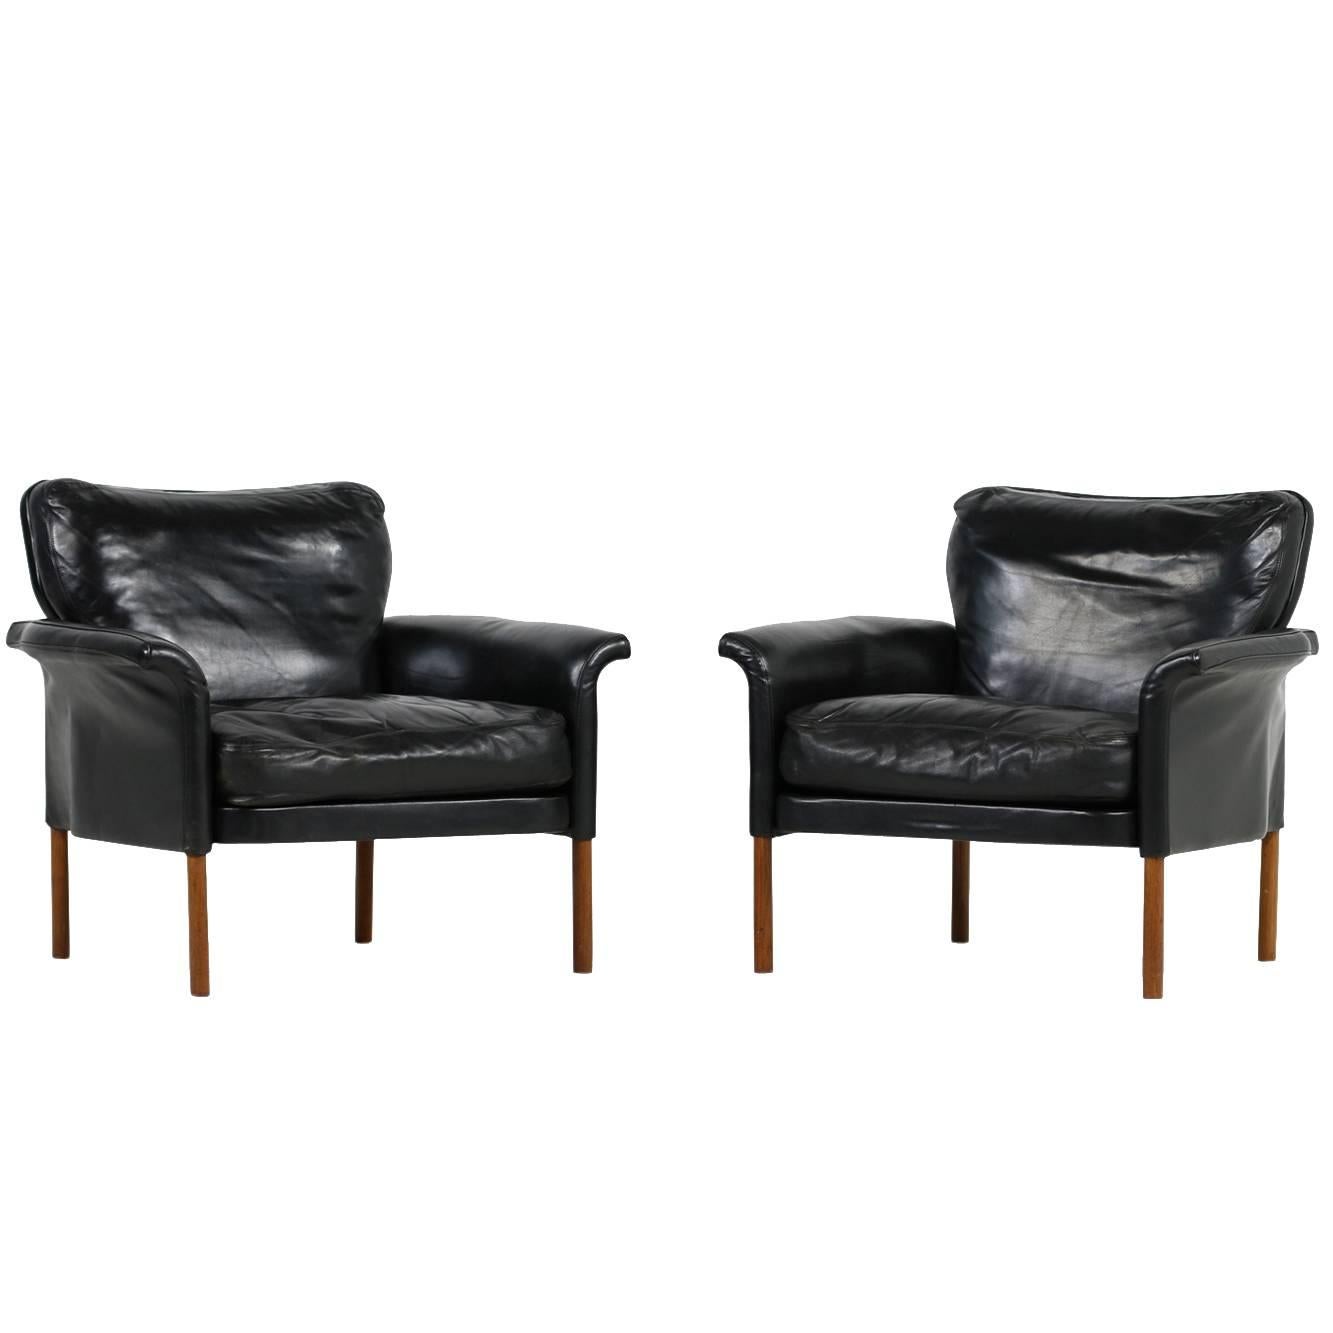 Pair of Leather and Teak Lounge Chairs with Down Filling Hans Olsen Attributed